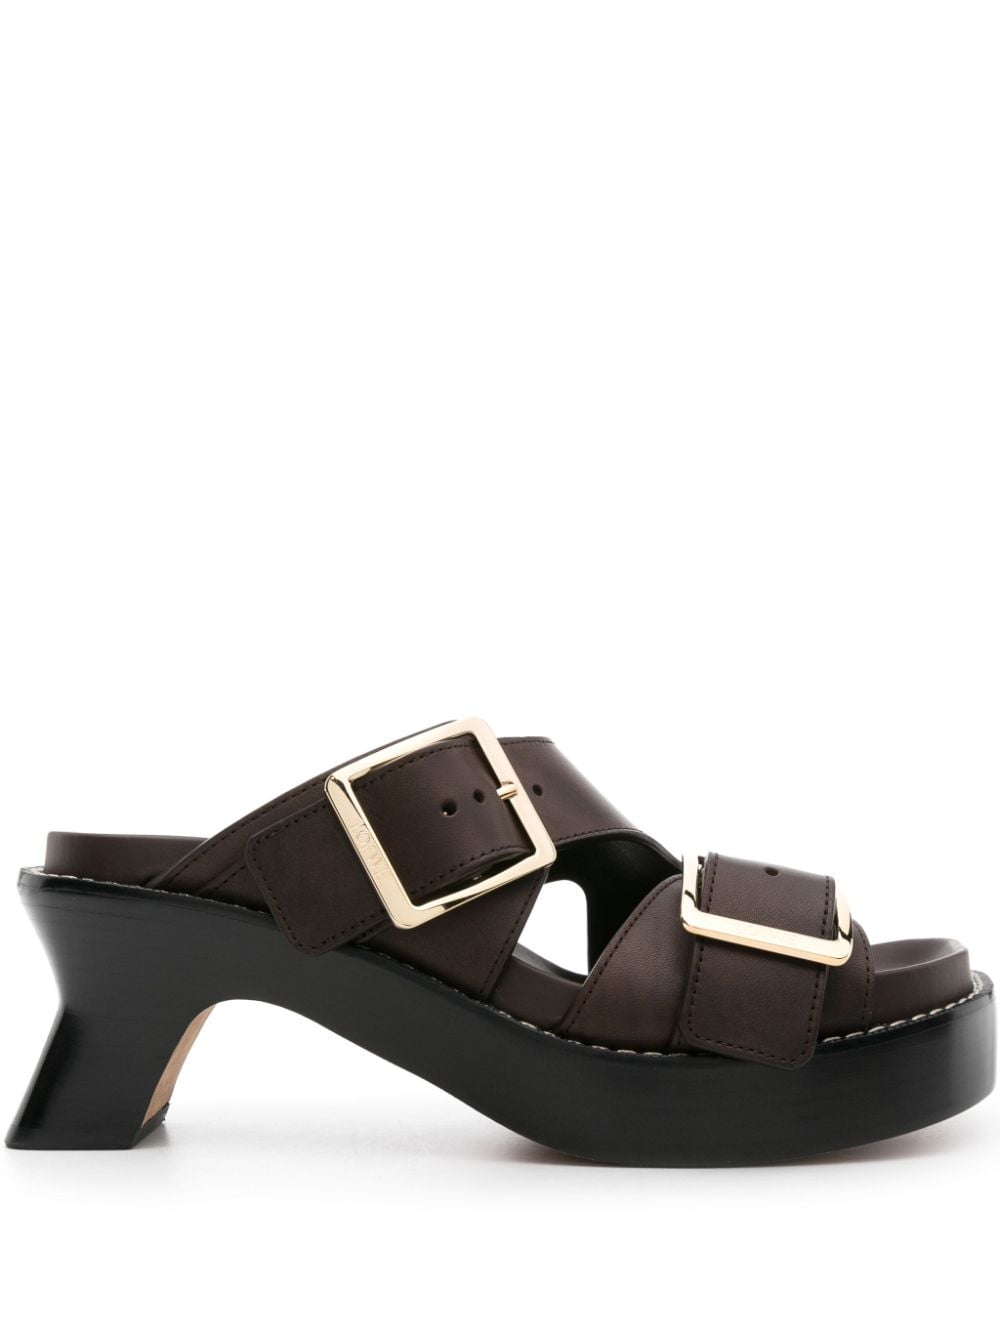 LOEWE 70MM BUCKLED LEATHER MULES